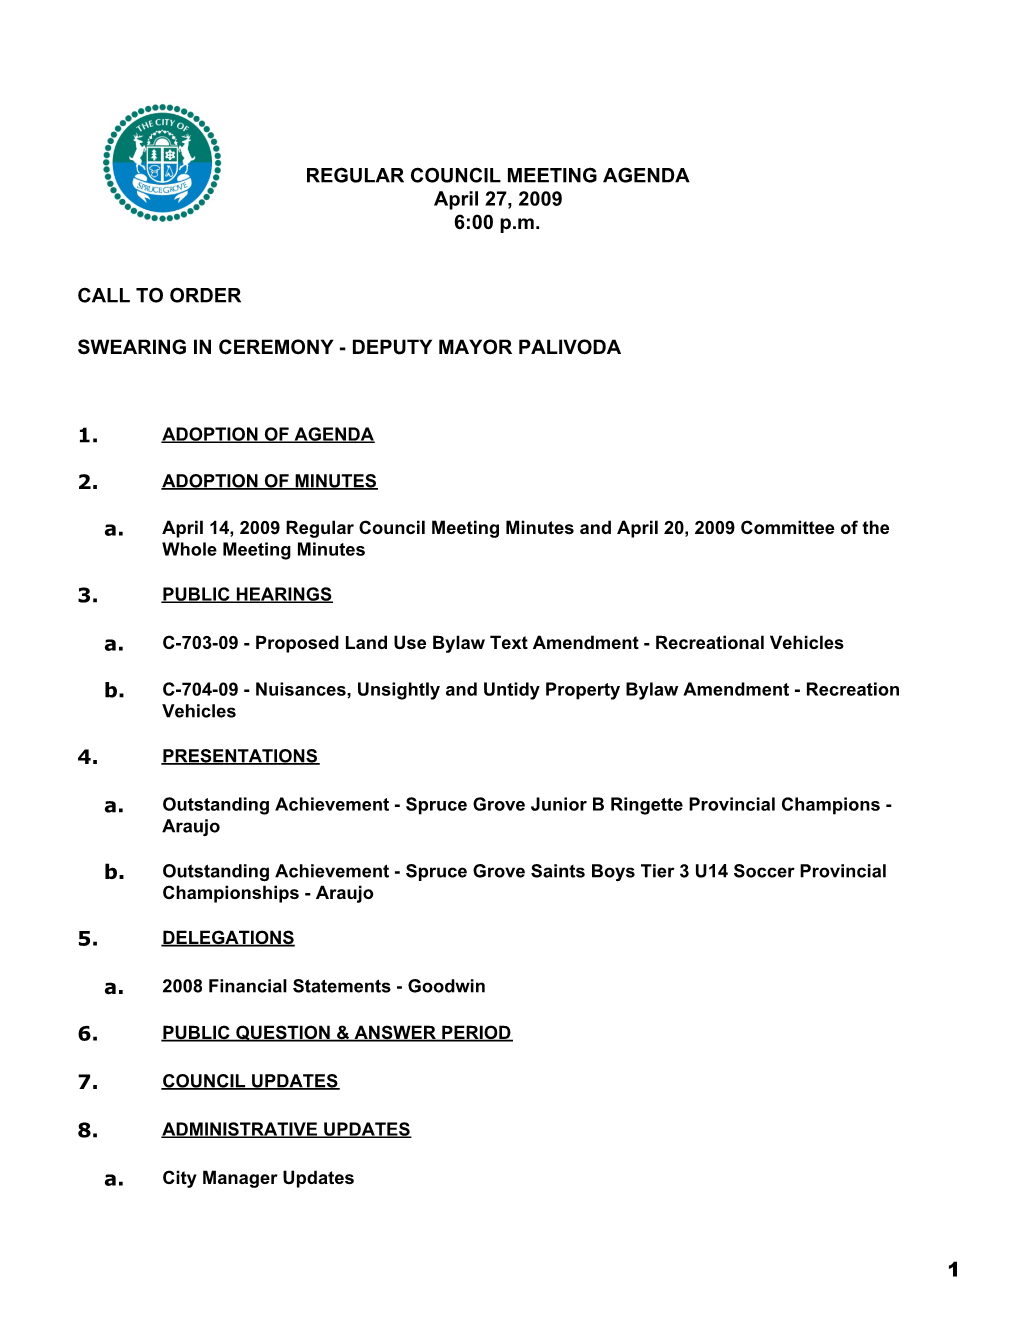 REGULAR COUNCIL MEETING AGENDA April 27, 2009 6:00 Pm CALL to ORDER SWEARING in CEREMONY